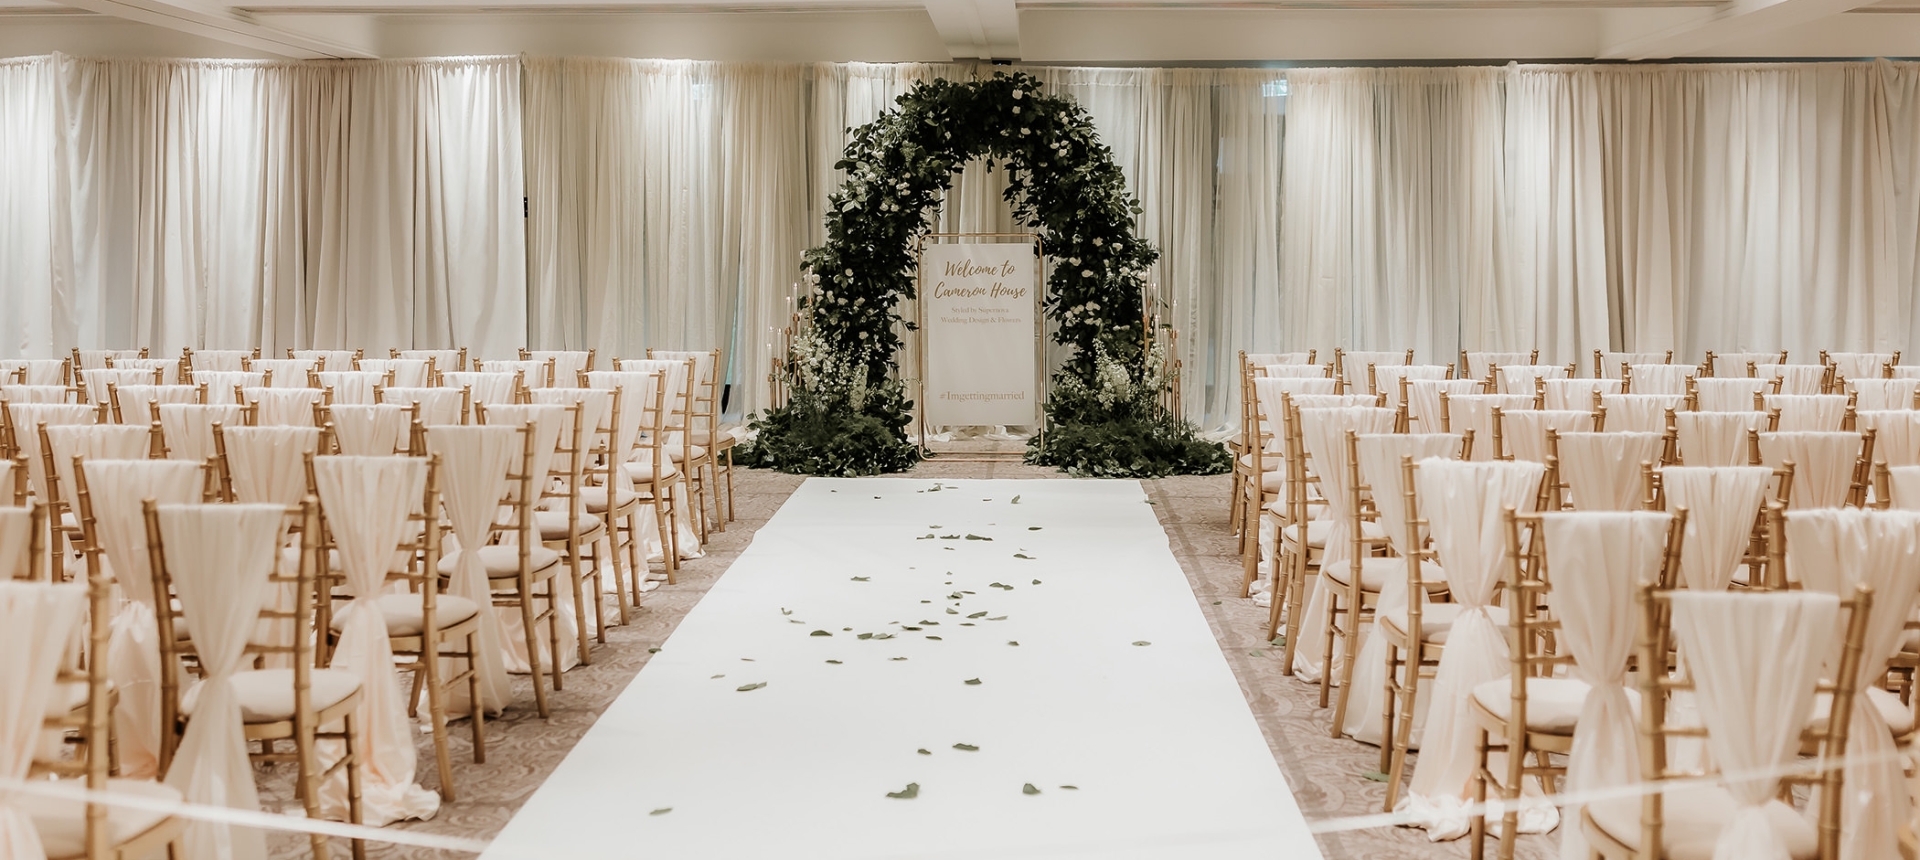 large wedding area with flower arch and white carpet leading up to it